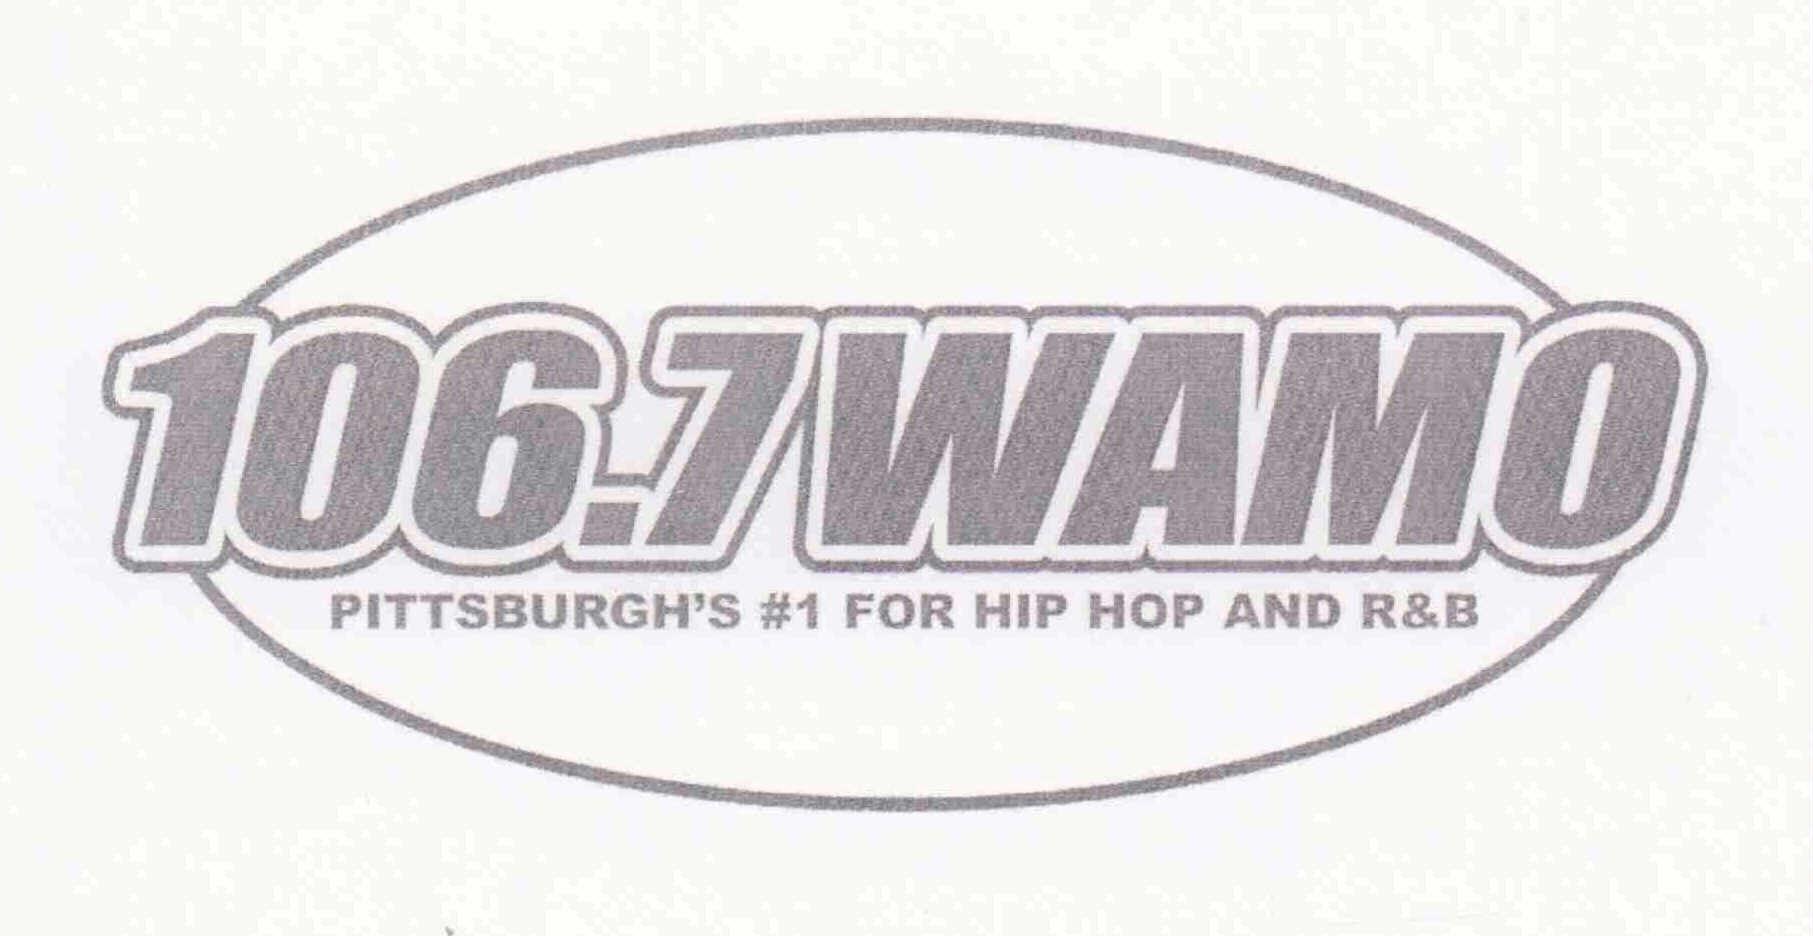  106.7 WAMO PITTSBURGH'S #1 FOR HIP HOP AND R&amp;B